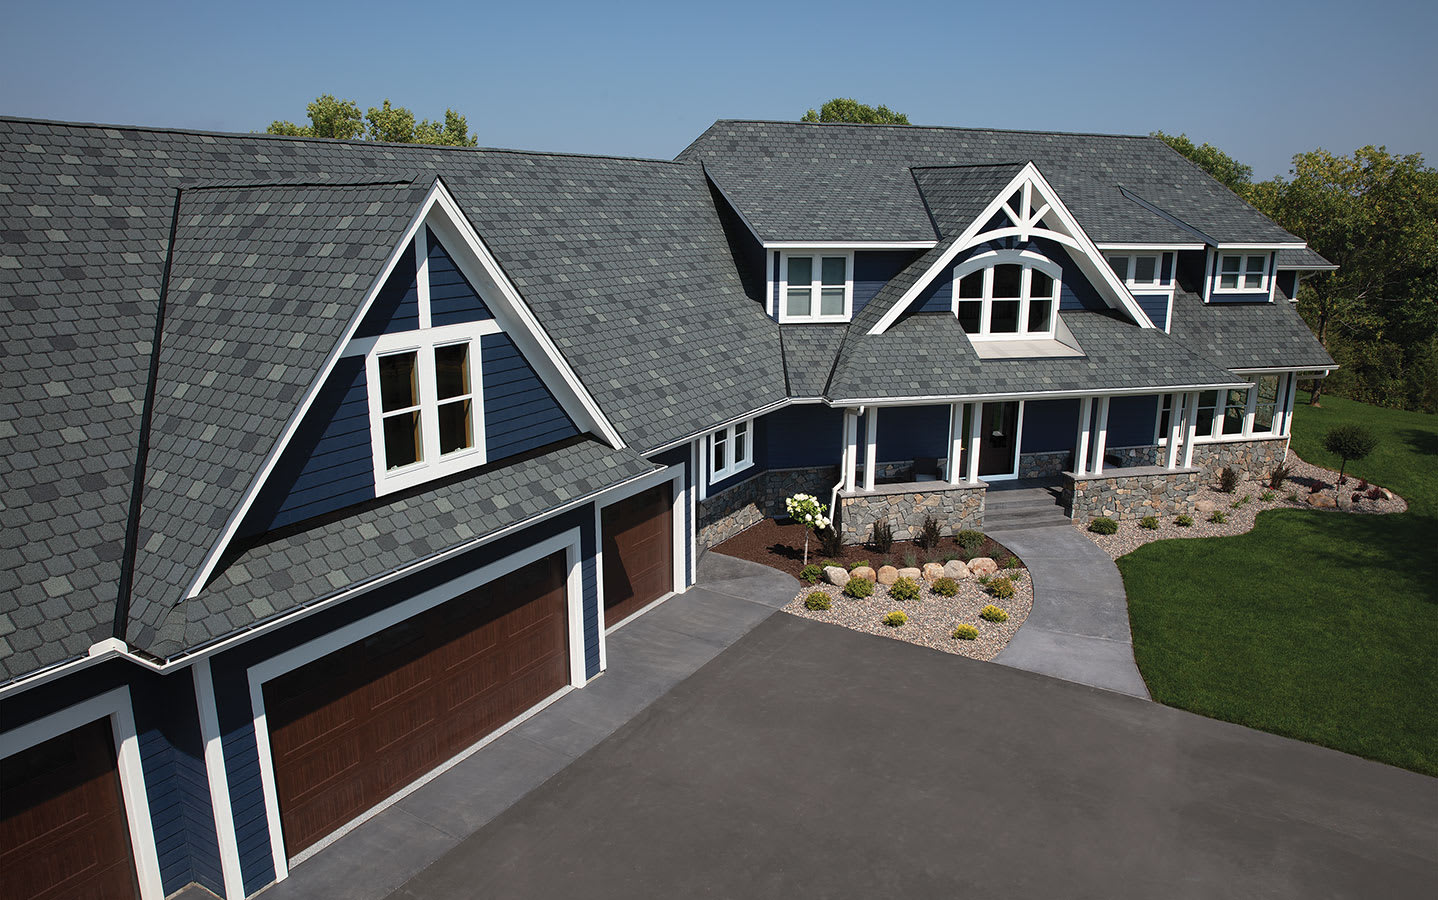 Residential Roofing Shingles on a house